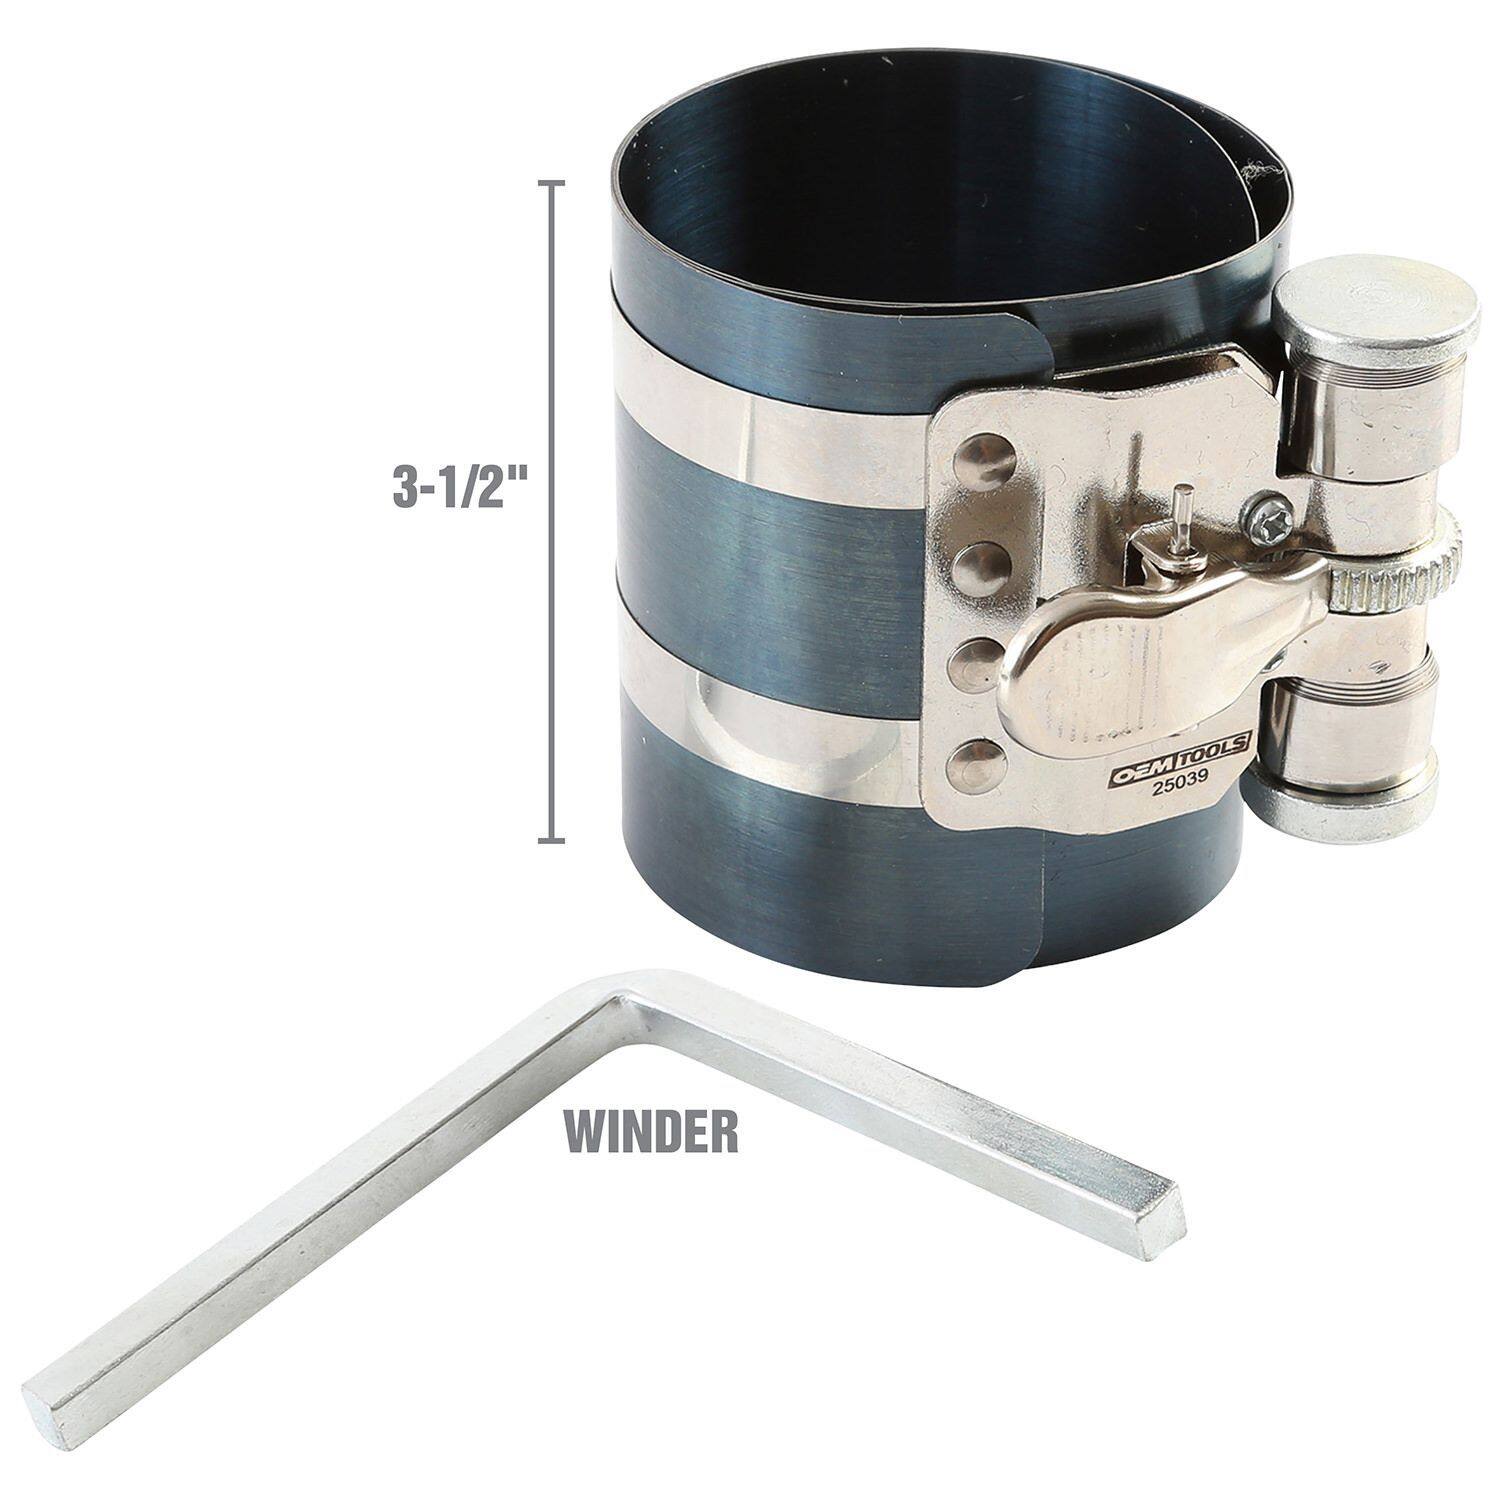 Wiseco Piston Ring Compressor Tool - Piston Ring Installation Tool | 3SX  Performance Home Page